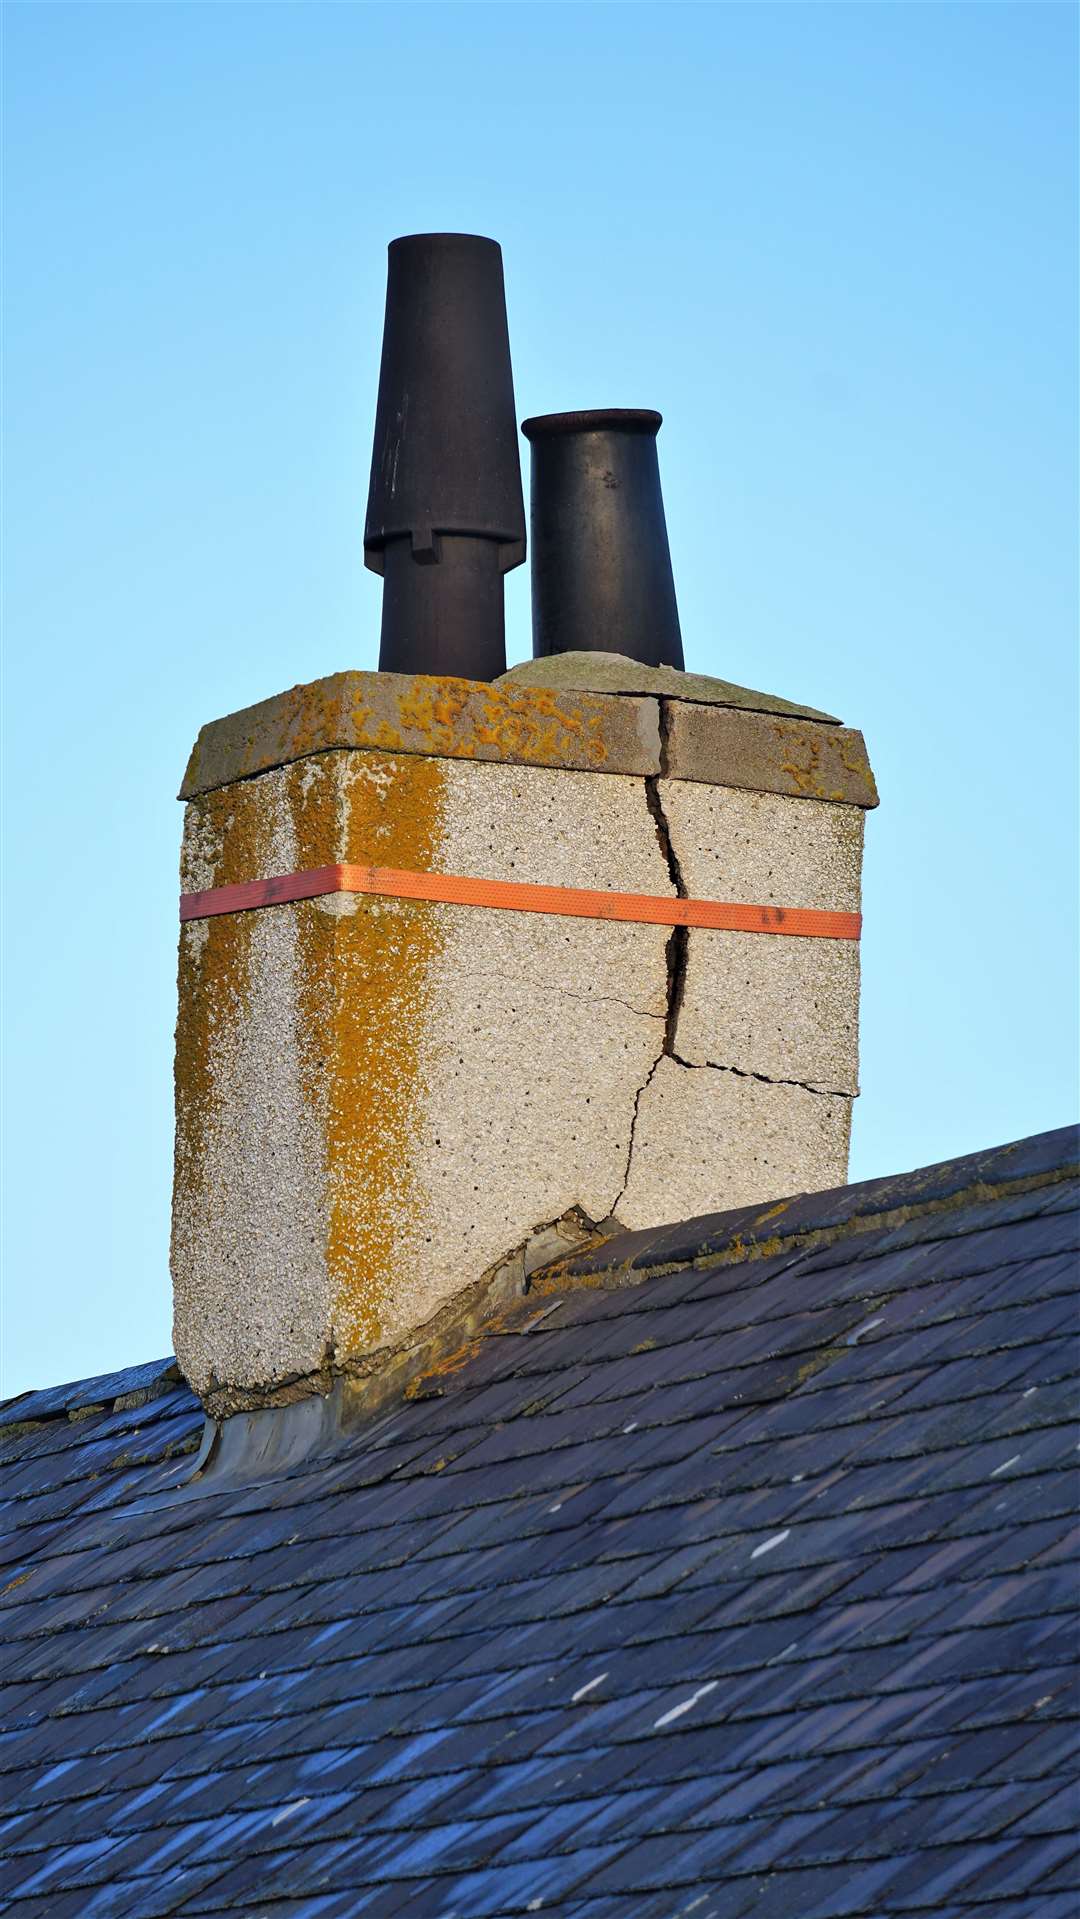 The cracked chimney stack at the Nicolson household which has steadily declined over the past six years. The council has fitted a ratchet strap to maintain some structural integrity but Mr Nicolson claims fire service personnel said it was dangerous and could collapse at any moment. Picture: DGS